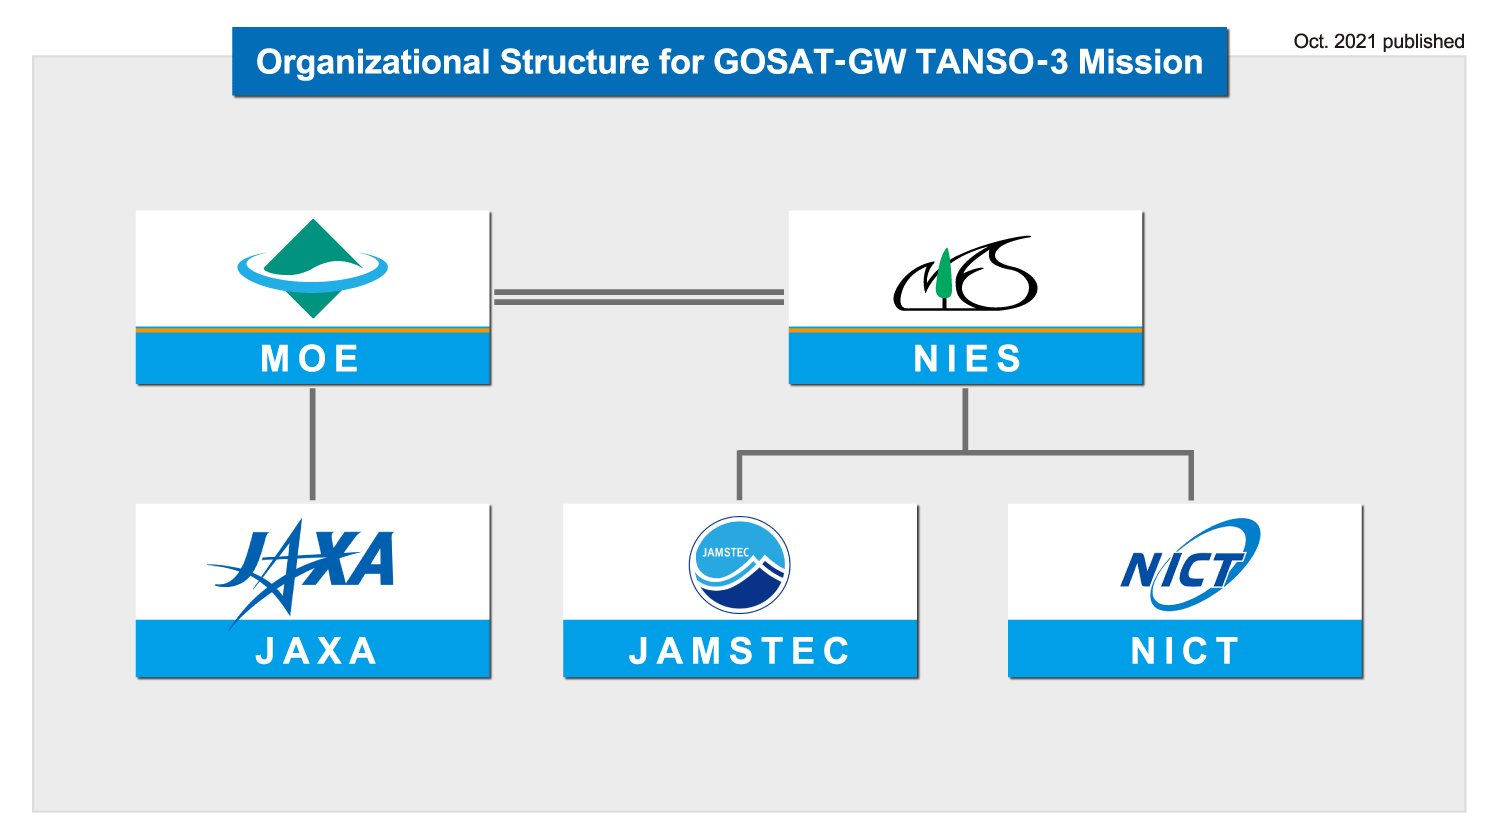 Organizational Structure for GOSAT-GW TANSO-3 Mission